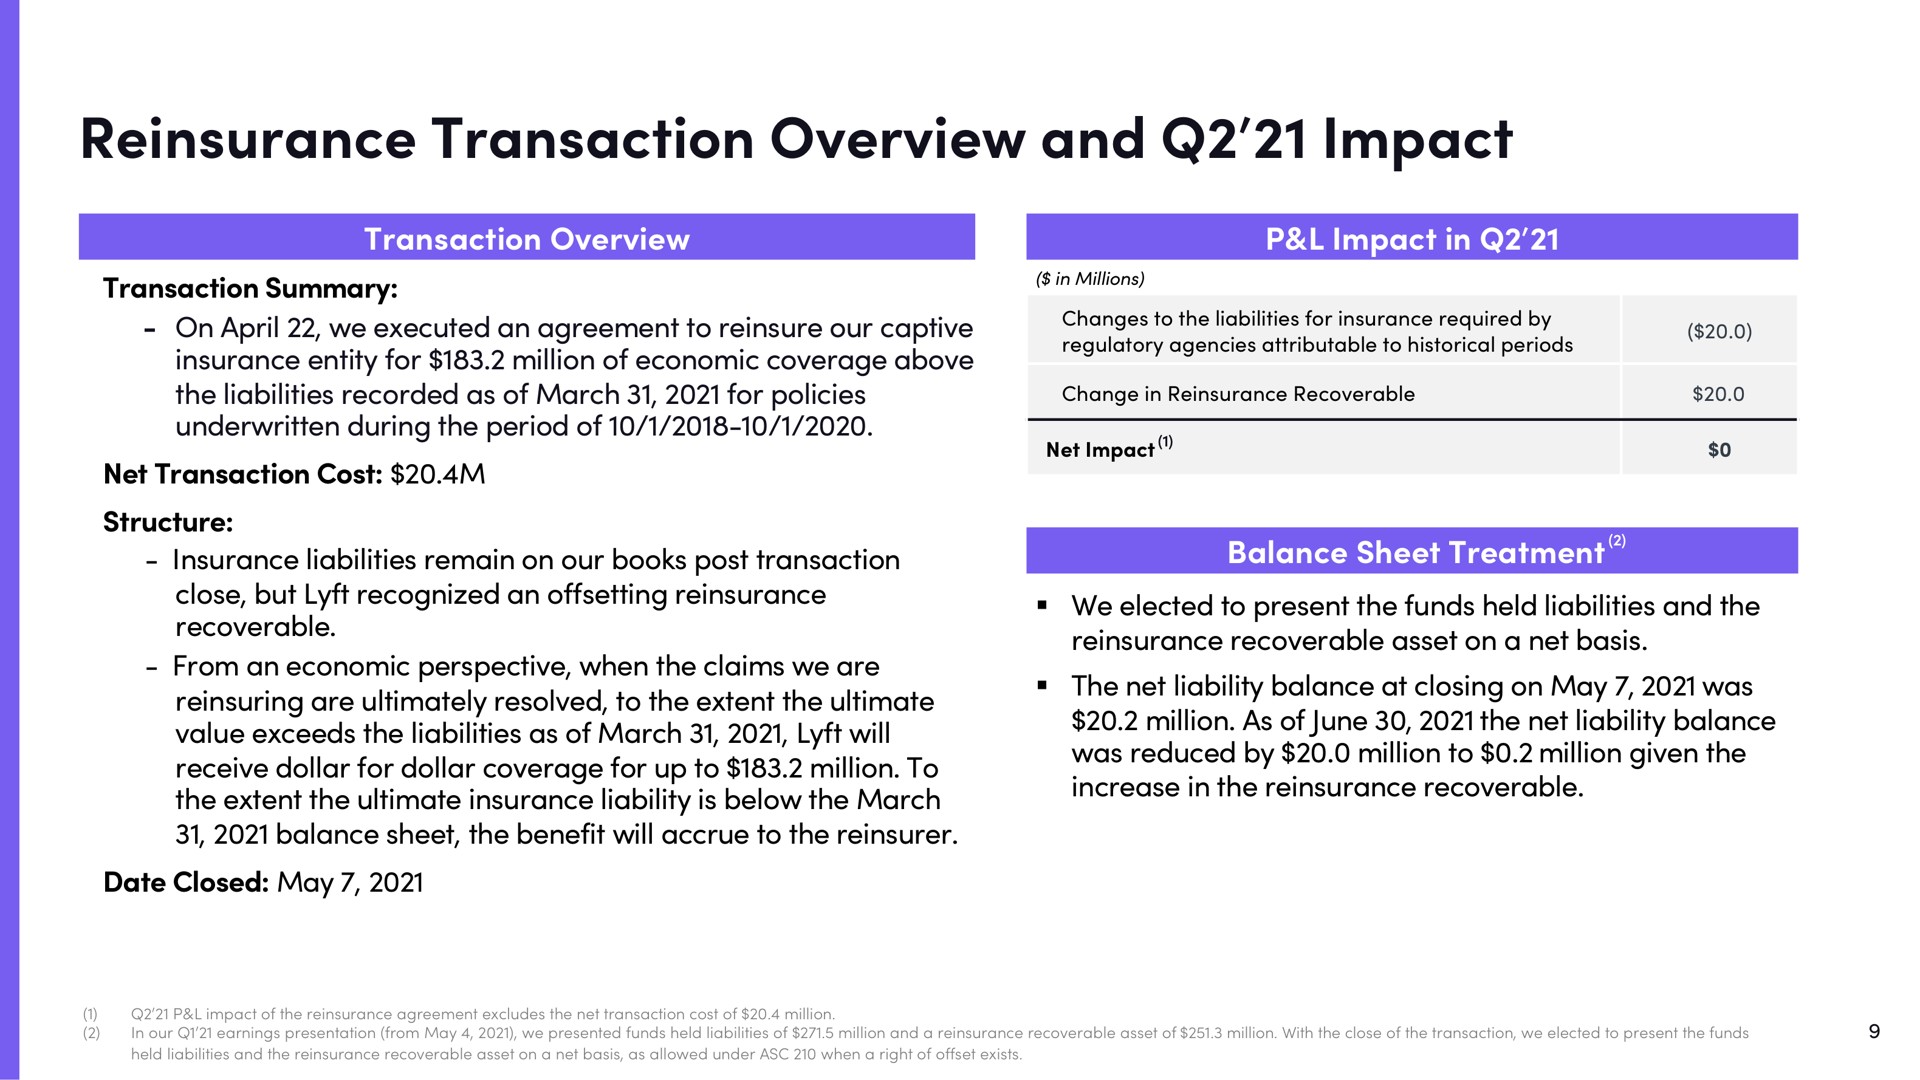 reinsurance transaction overview and impact | Lyft